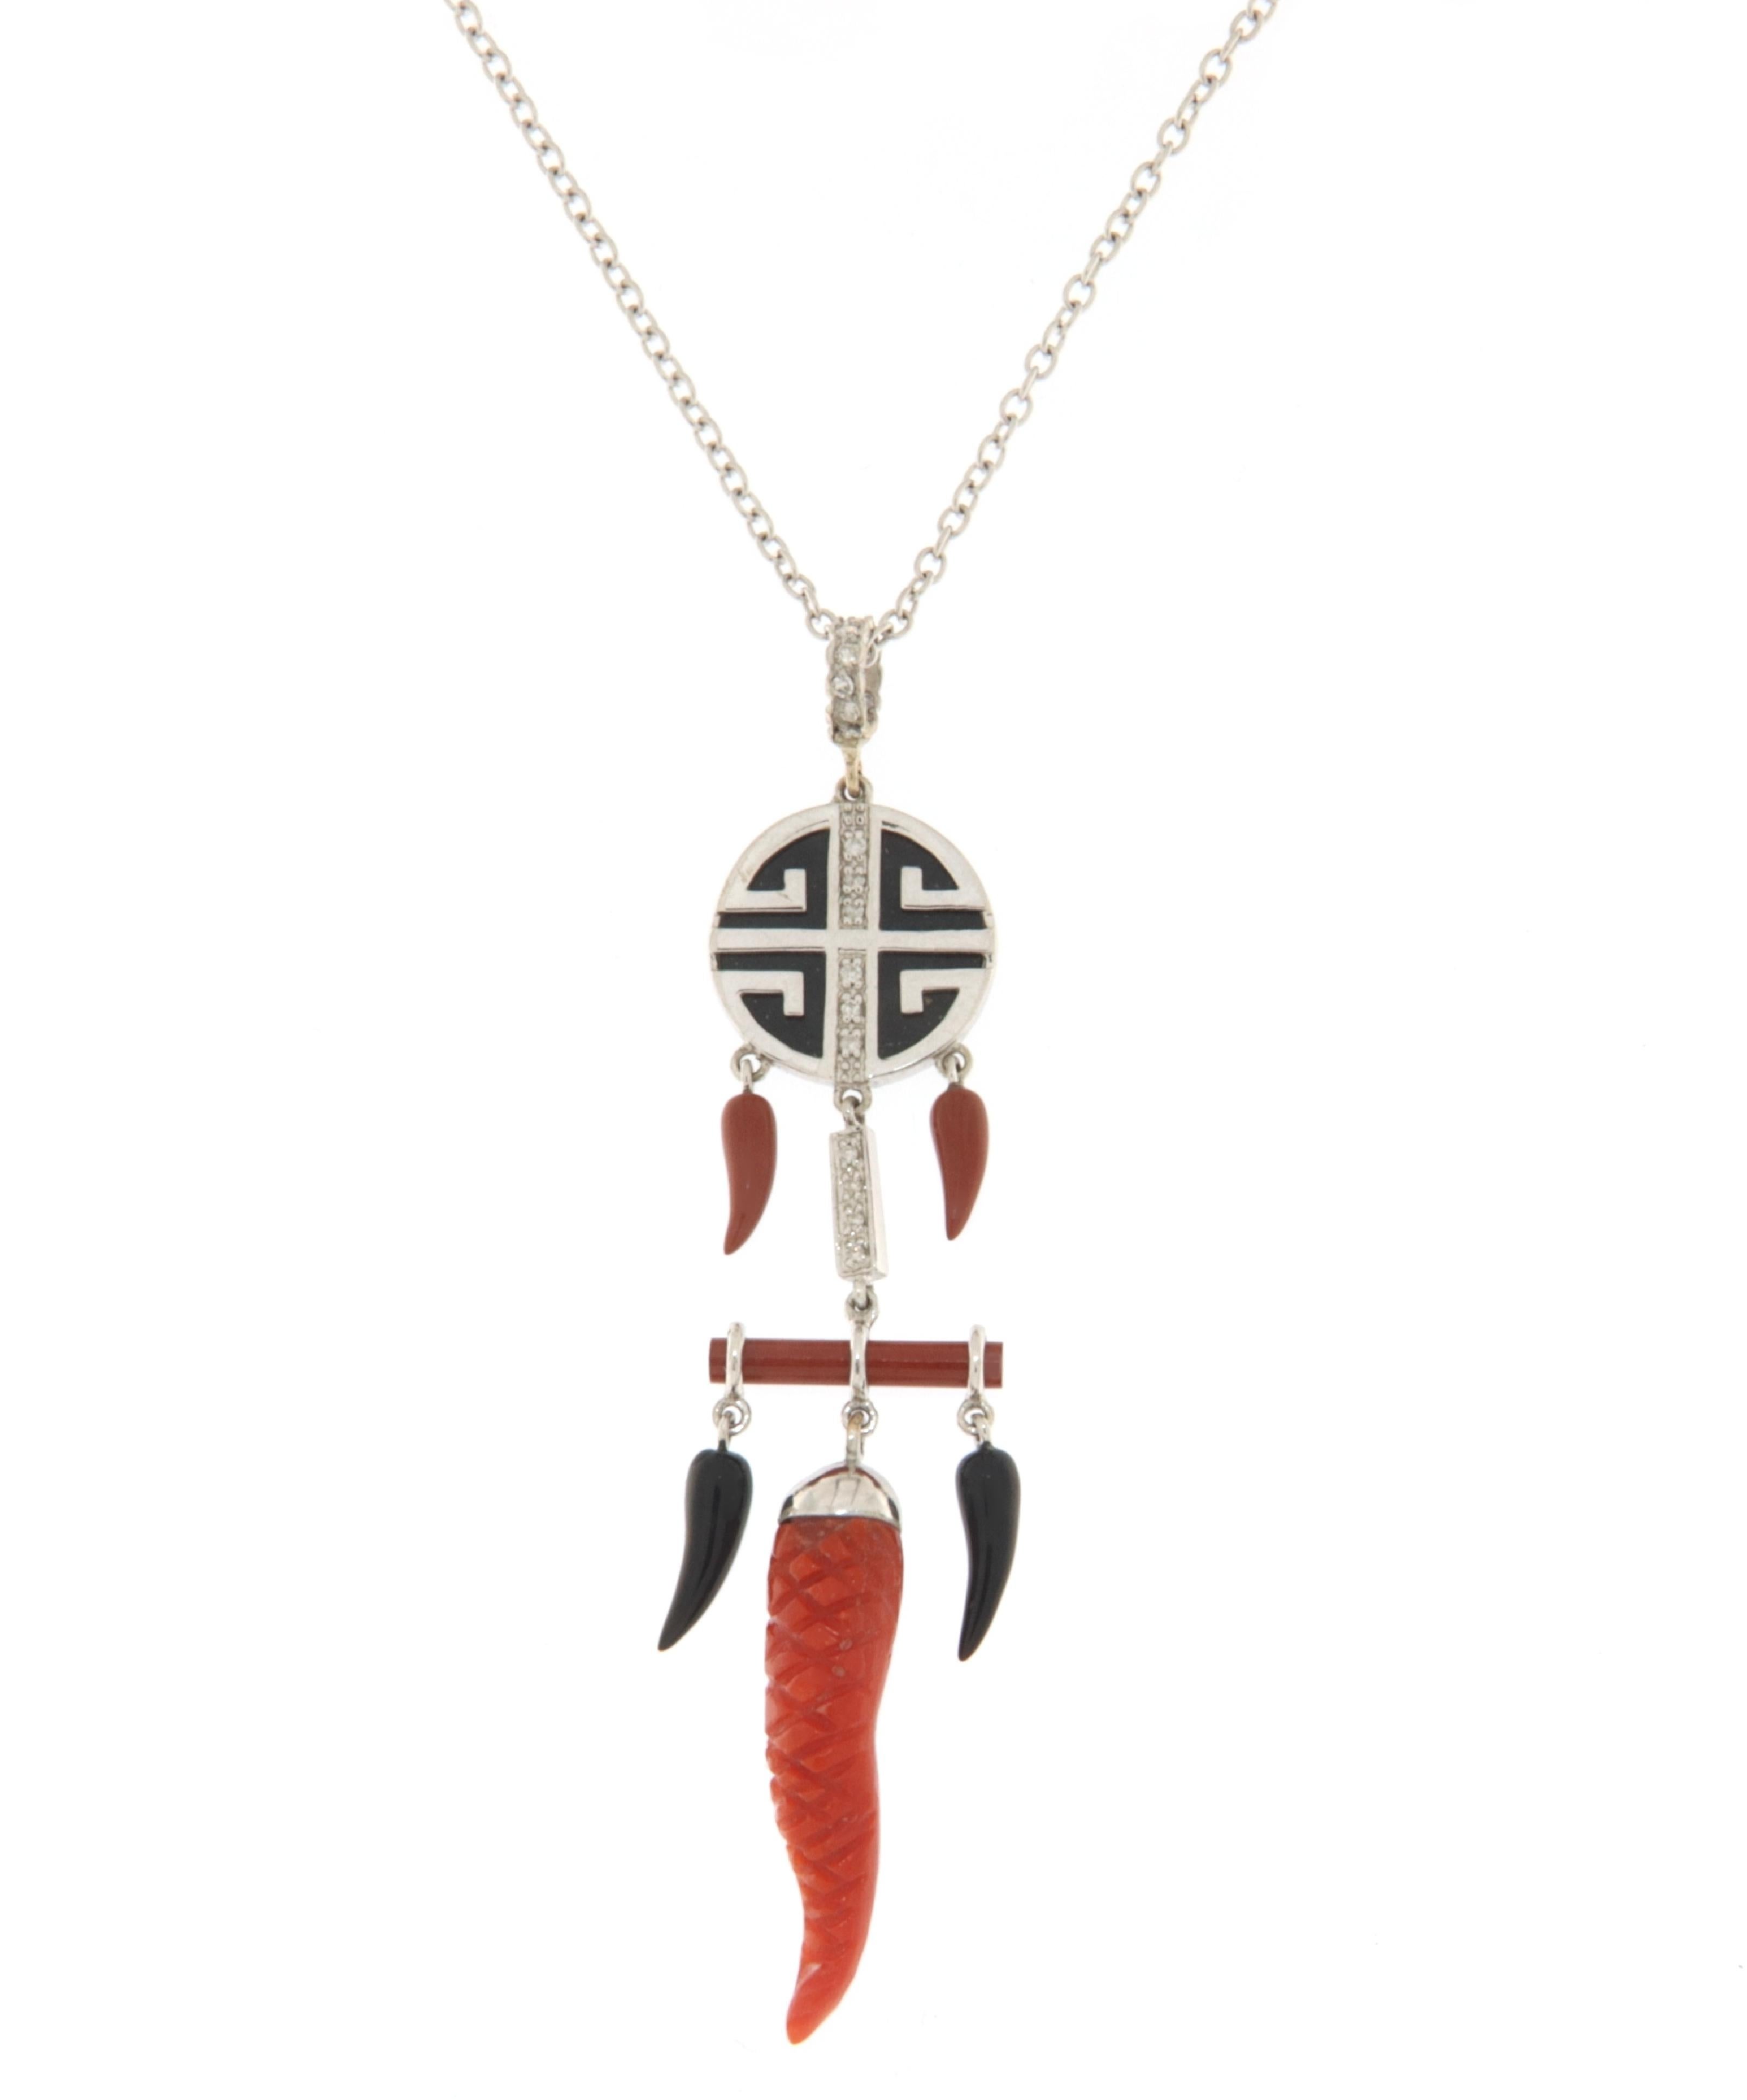 This striking pendant necklace in 18-karat white gold is a bold statement piece that effortlessly captures the essence of both modern style and ancient symbolism. The pendant is adorned with three natural coral horns, each one showcasing the vibrant